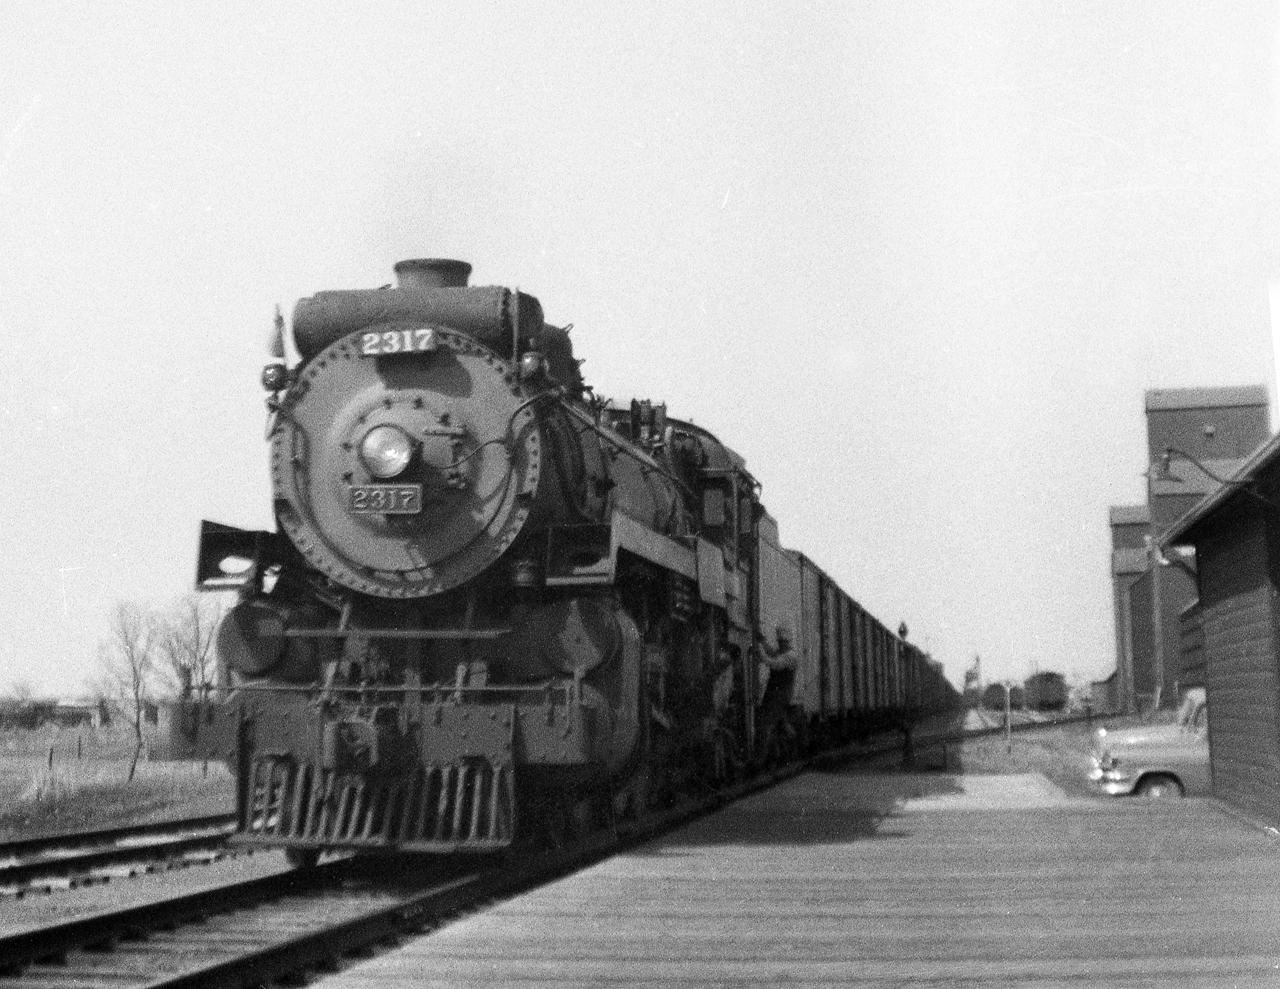 After walking train while G3c 4-6-2 2317 took on coal and water at the west end of town, the conductor gets off at the station to fill out the train register. In the steam era grain moving from southeast Saskatchewan moved from Weyburn via the Kisbey and Arcola subdivisions through a terminal at Souris. The 2317 is preserved at Steamtown in Scranton Penn.